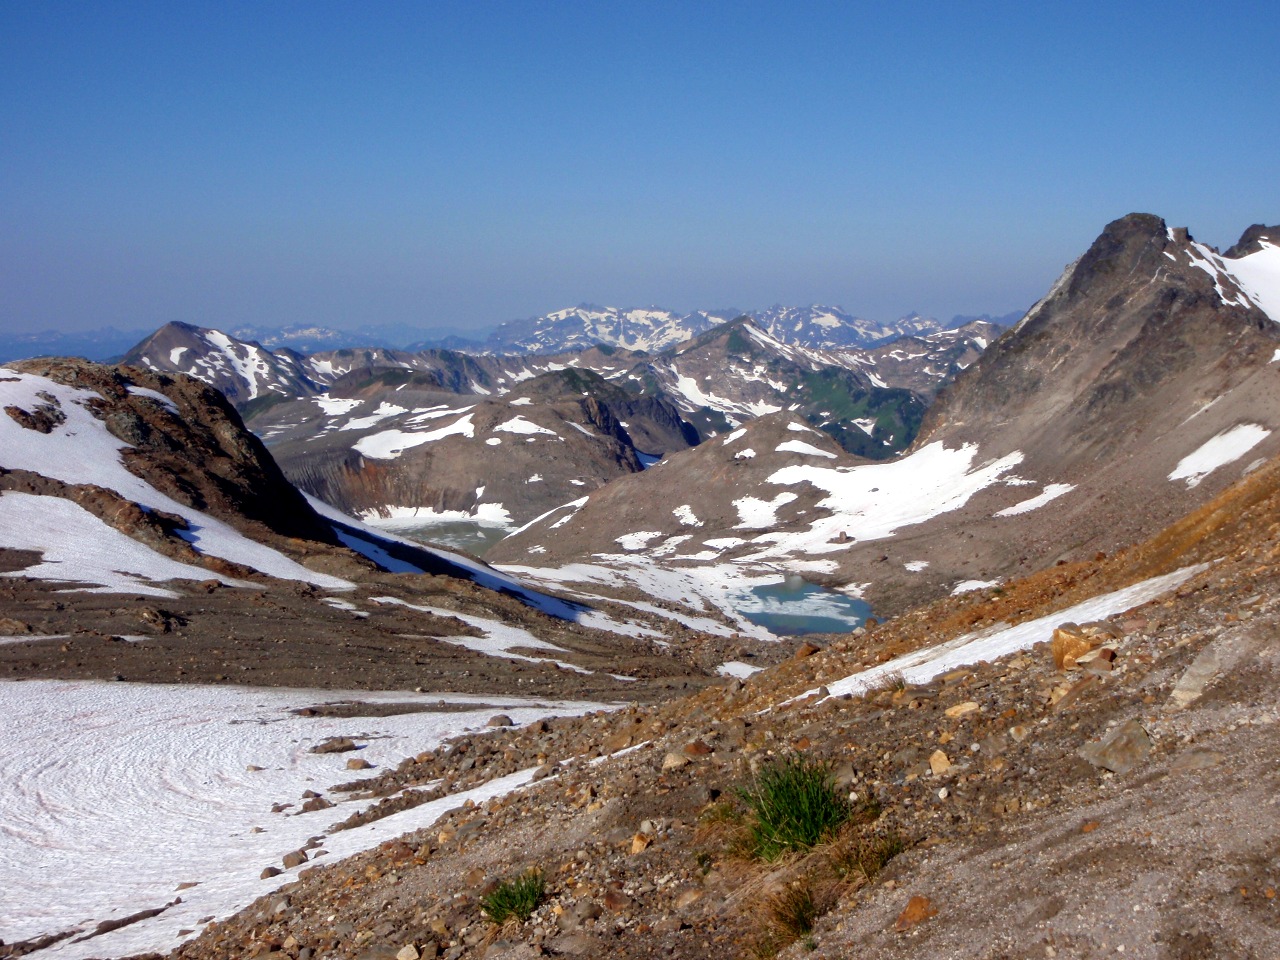 Looking back down at the White Chuck Glacier Basin. White Mountain on the left, Portal Peak right of center